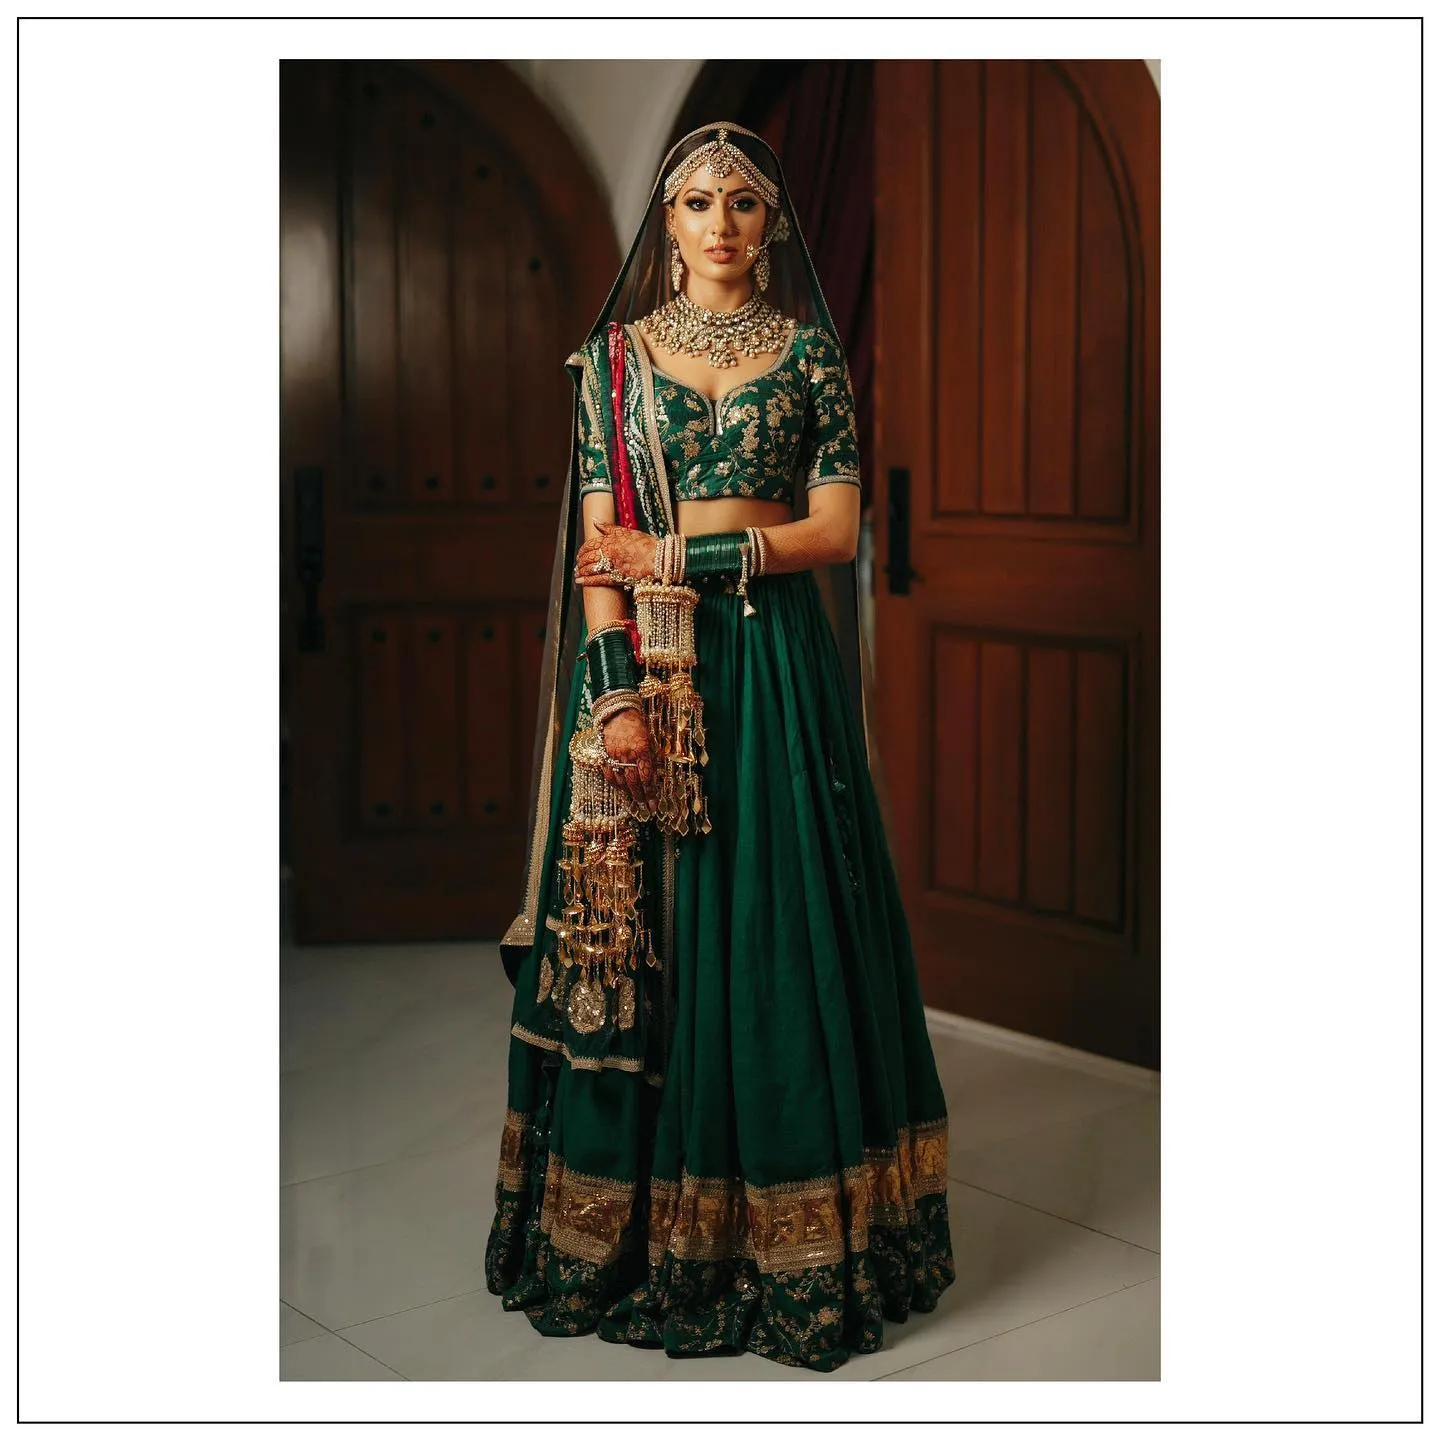 15+ Latest Bottle Green Lehenga Designs For Brides-To-Be